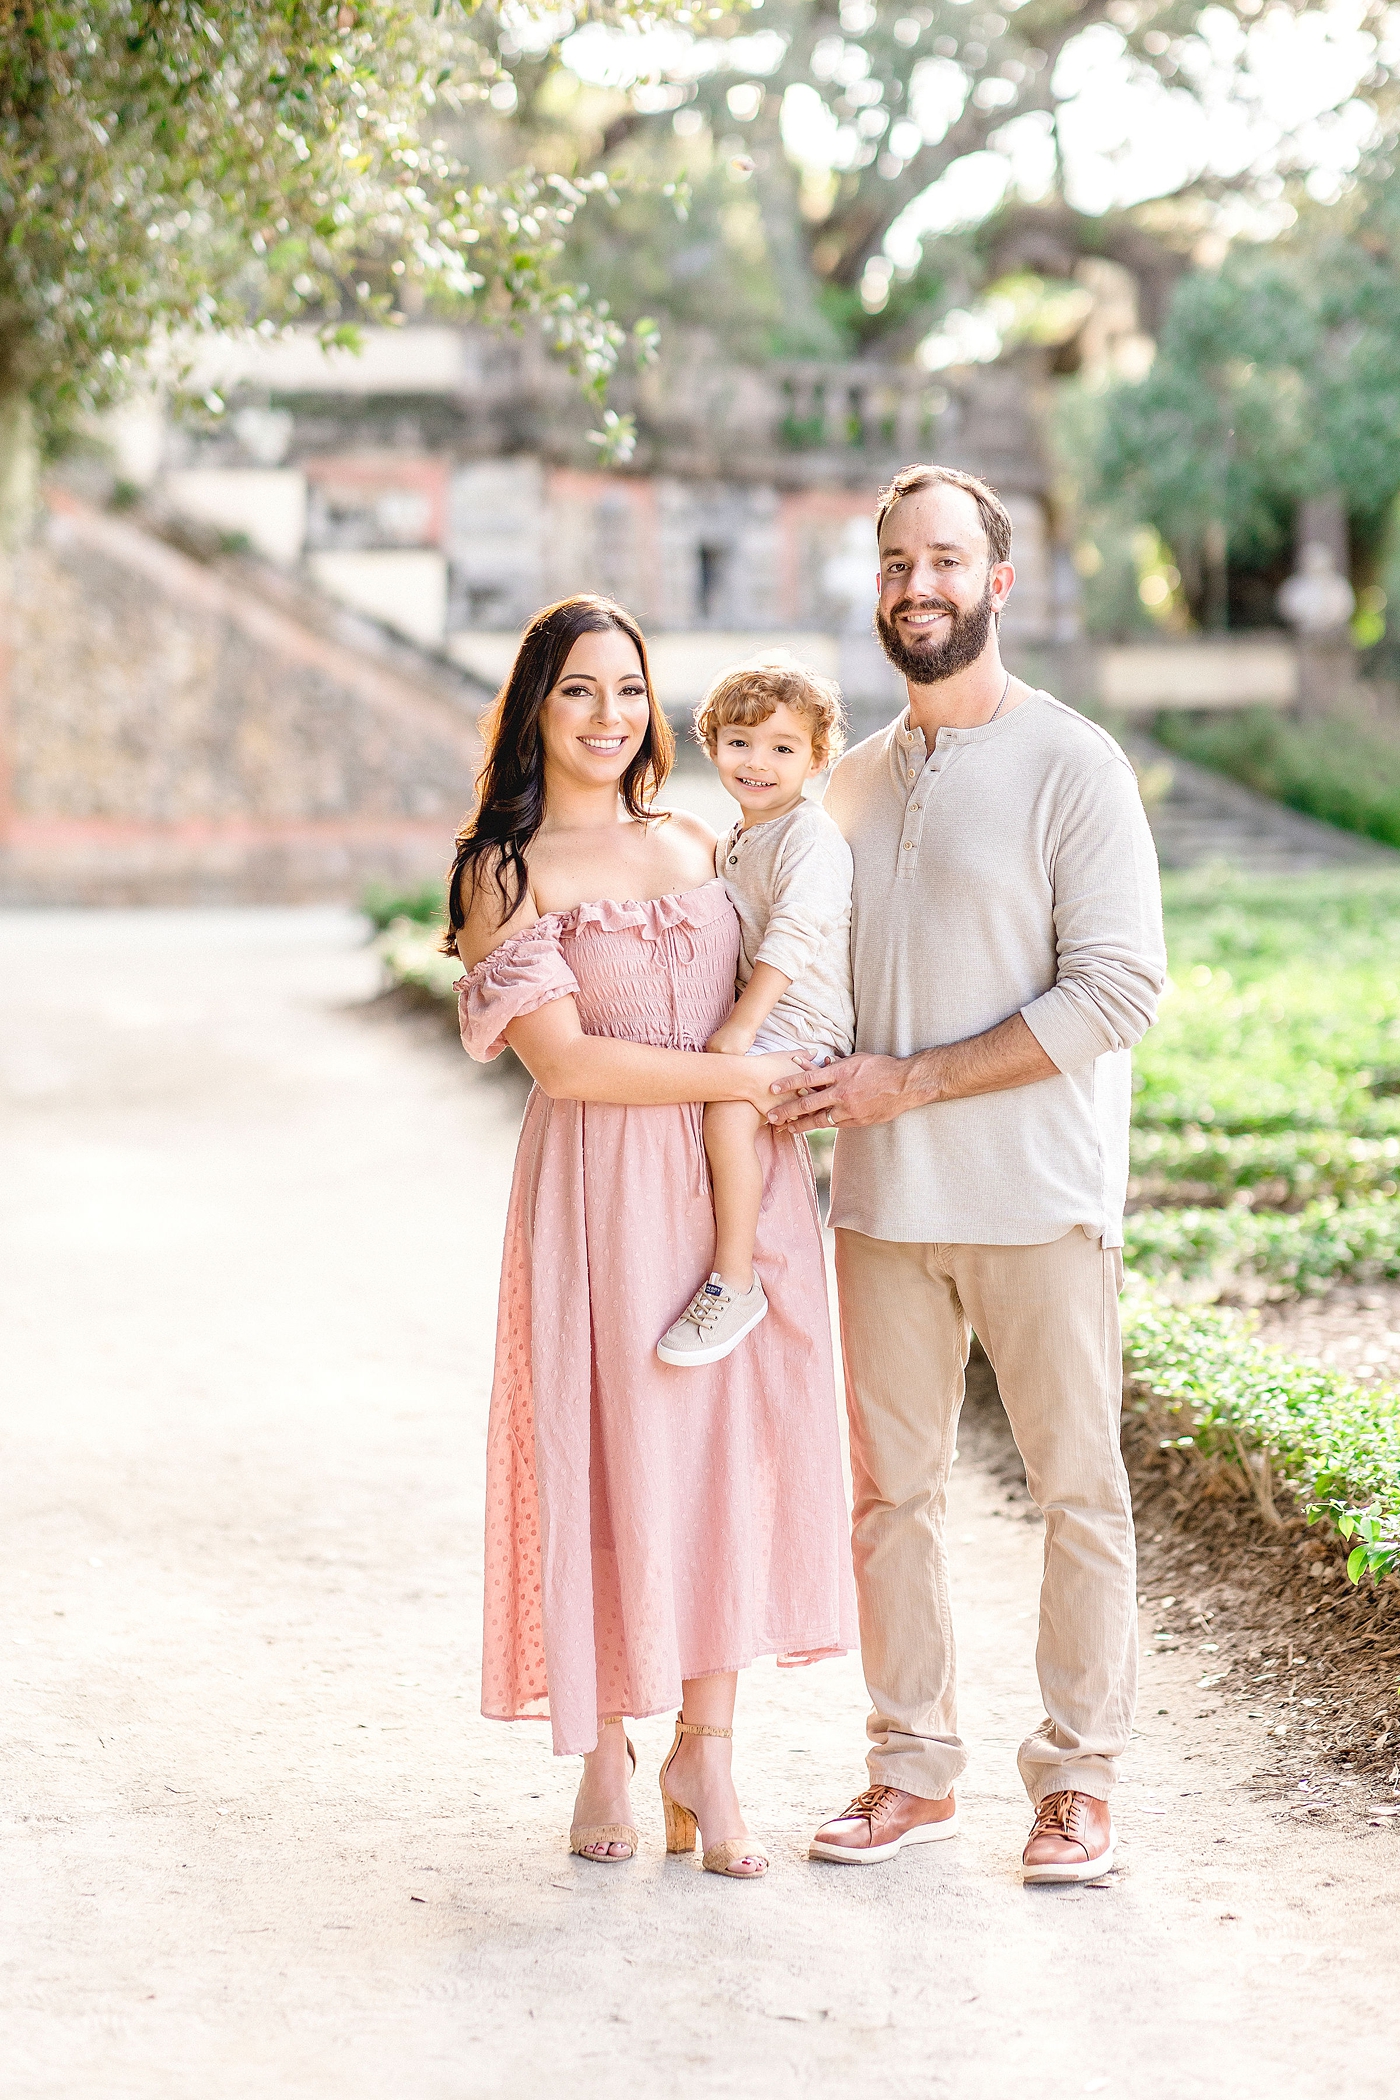 Beautiful smiling family portrait at Vizcaya Museum and Gardens in Miami. Photo by Ivanna Vidal Photography.